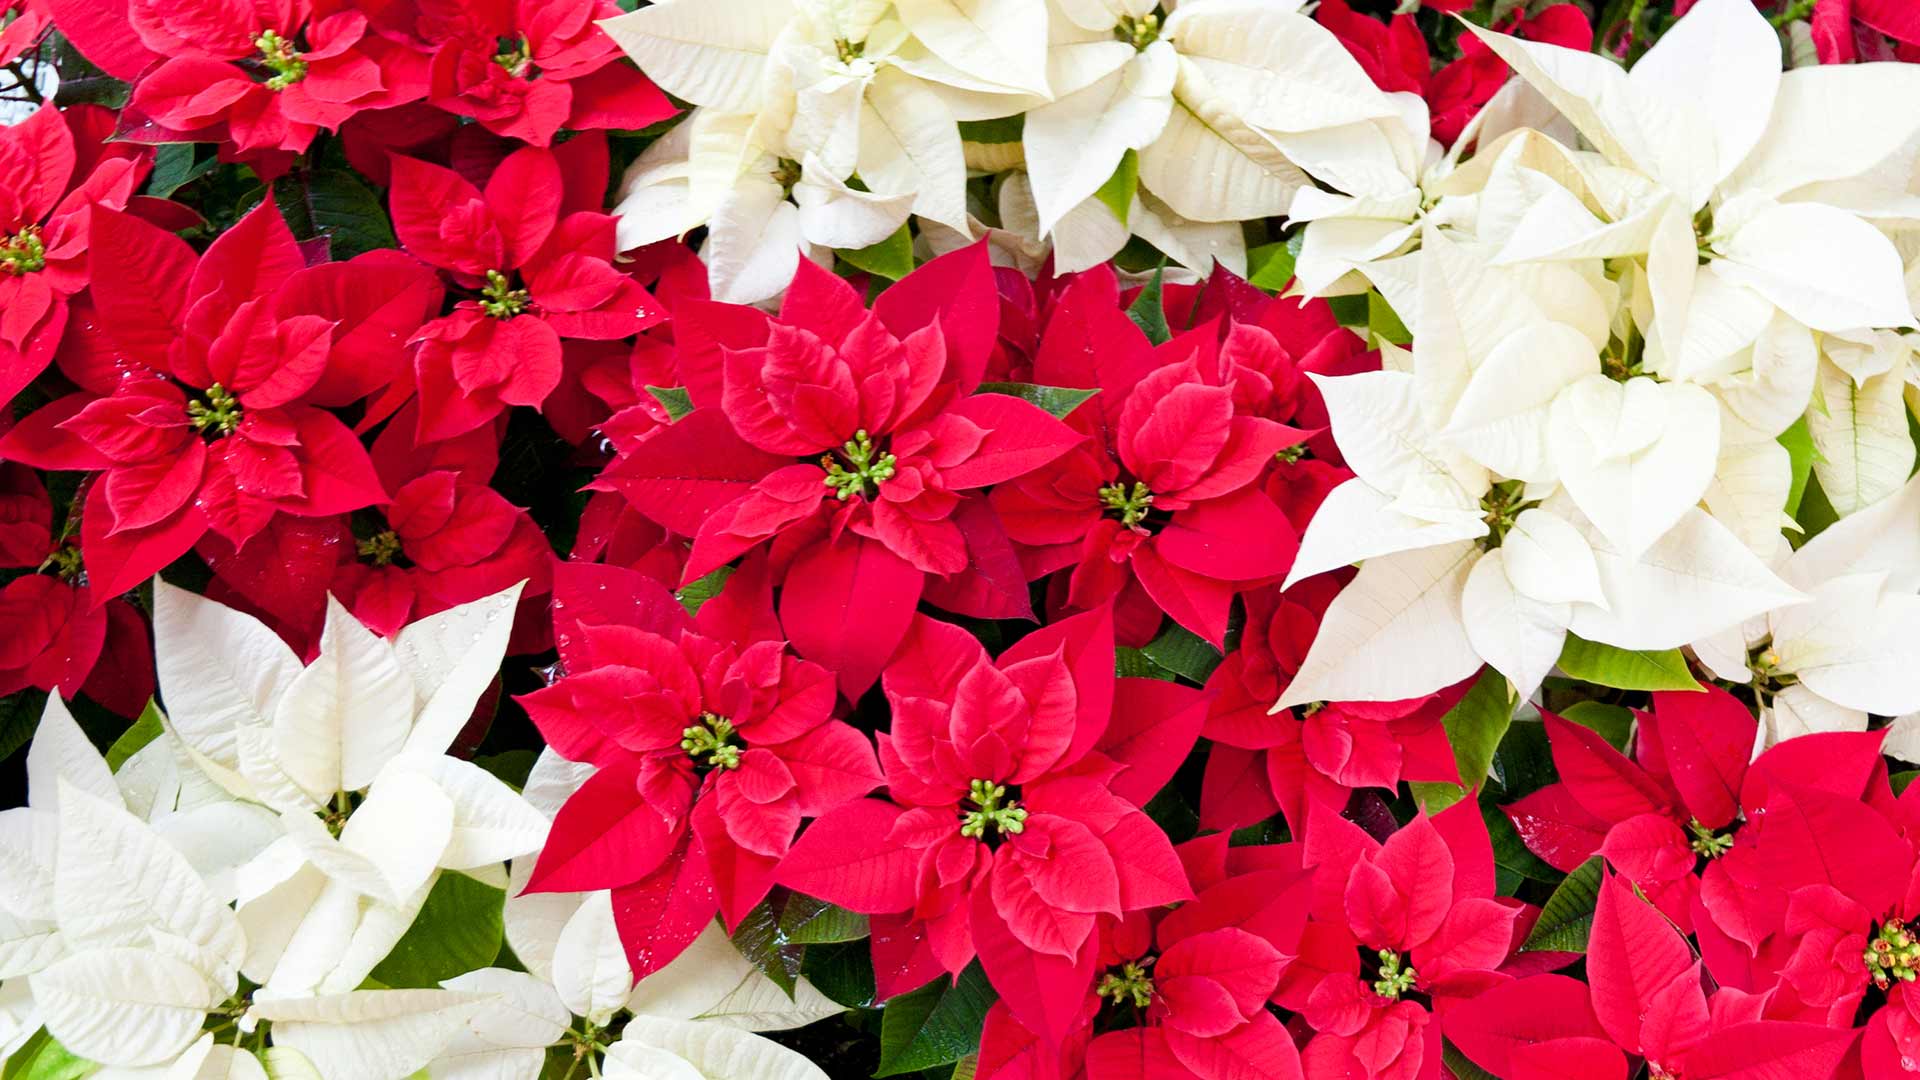 White, red and pink poinsettias